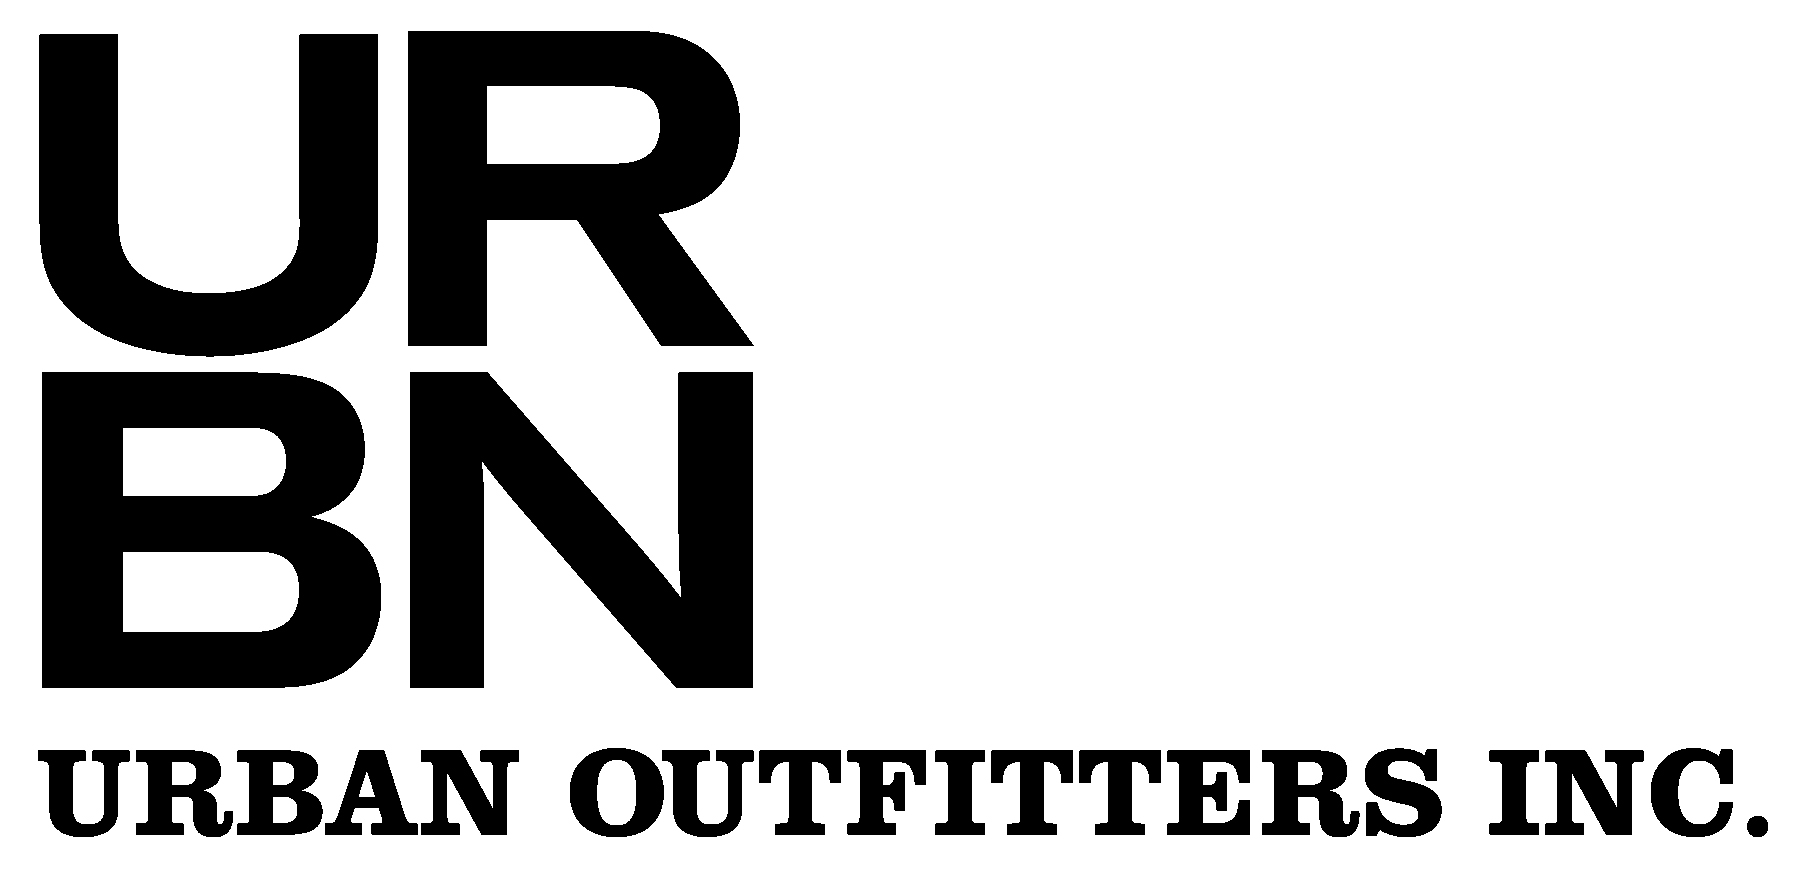 Urban Outfitters, Inc. Â« Logos  Brands Directory